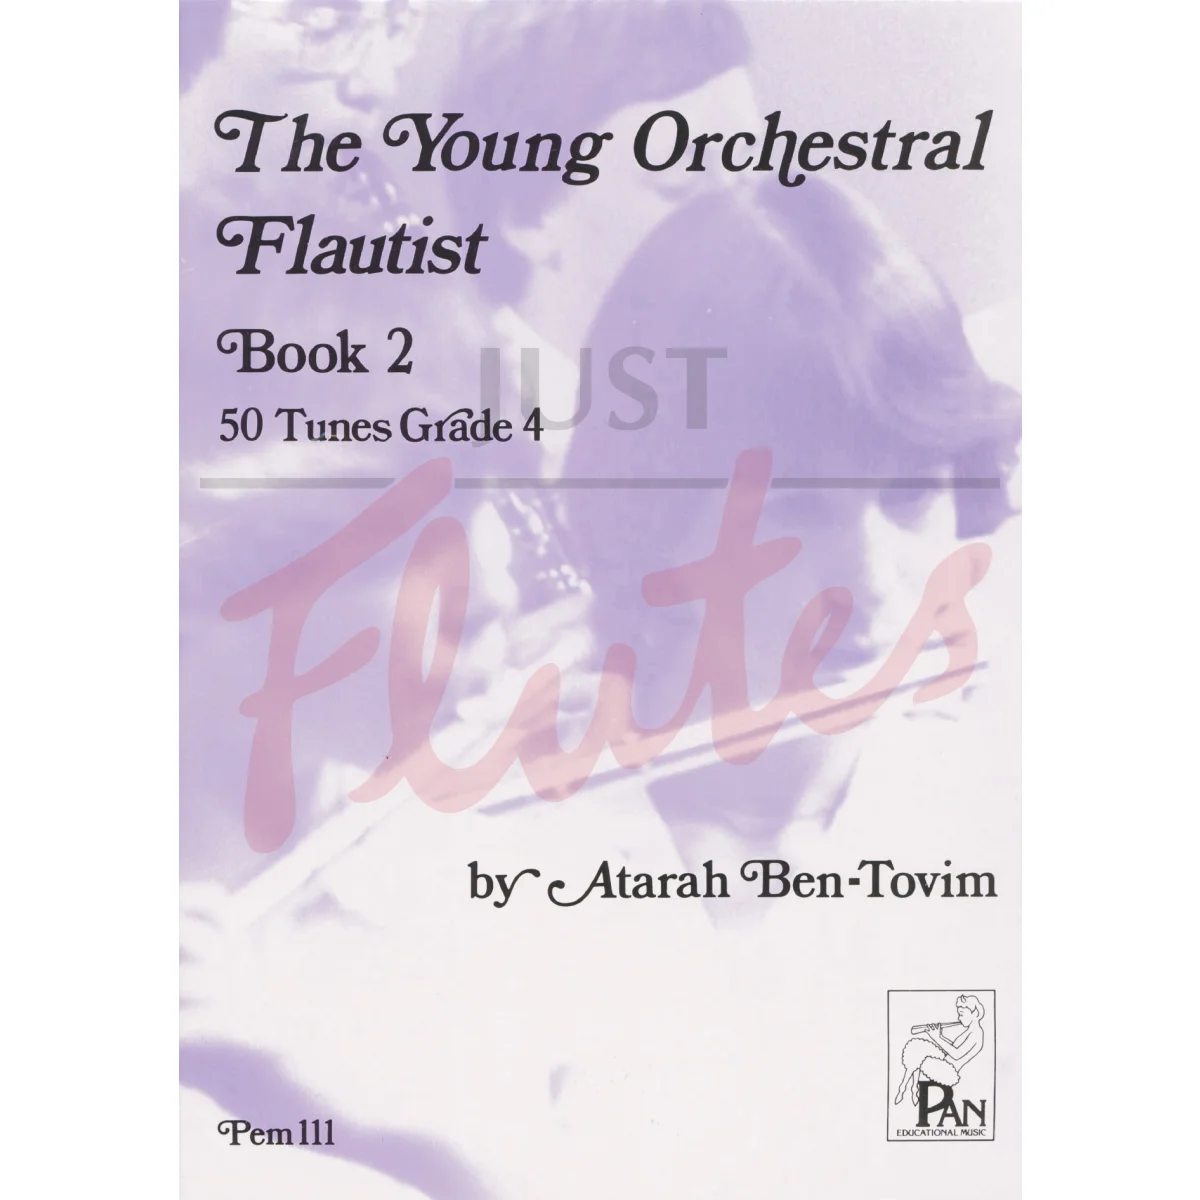 The Young Orchestral Flautist Book 2